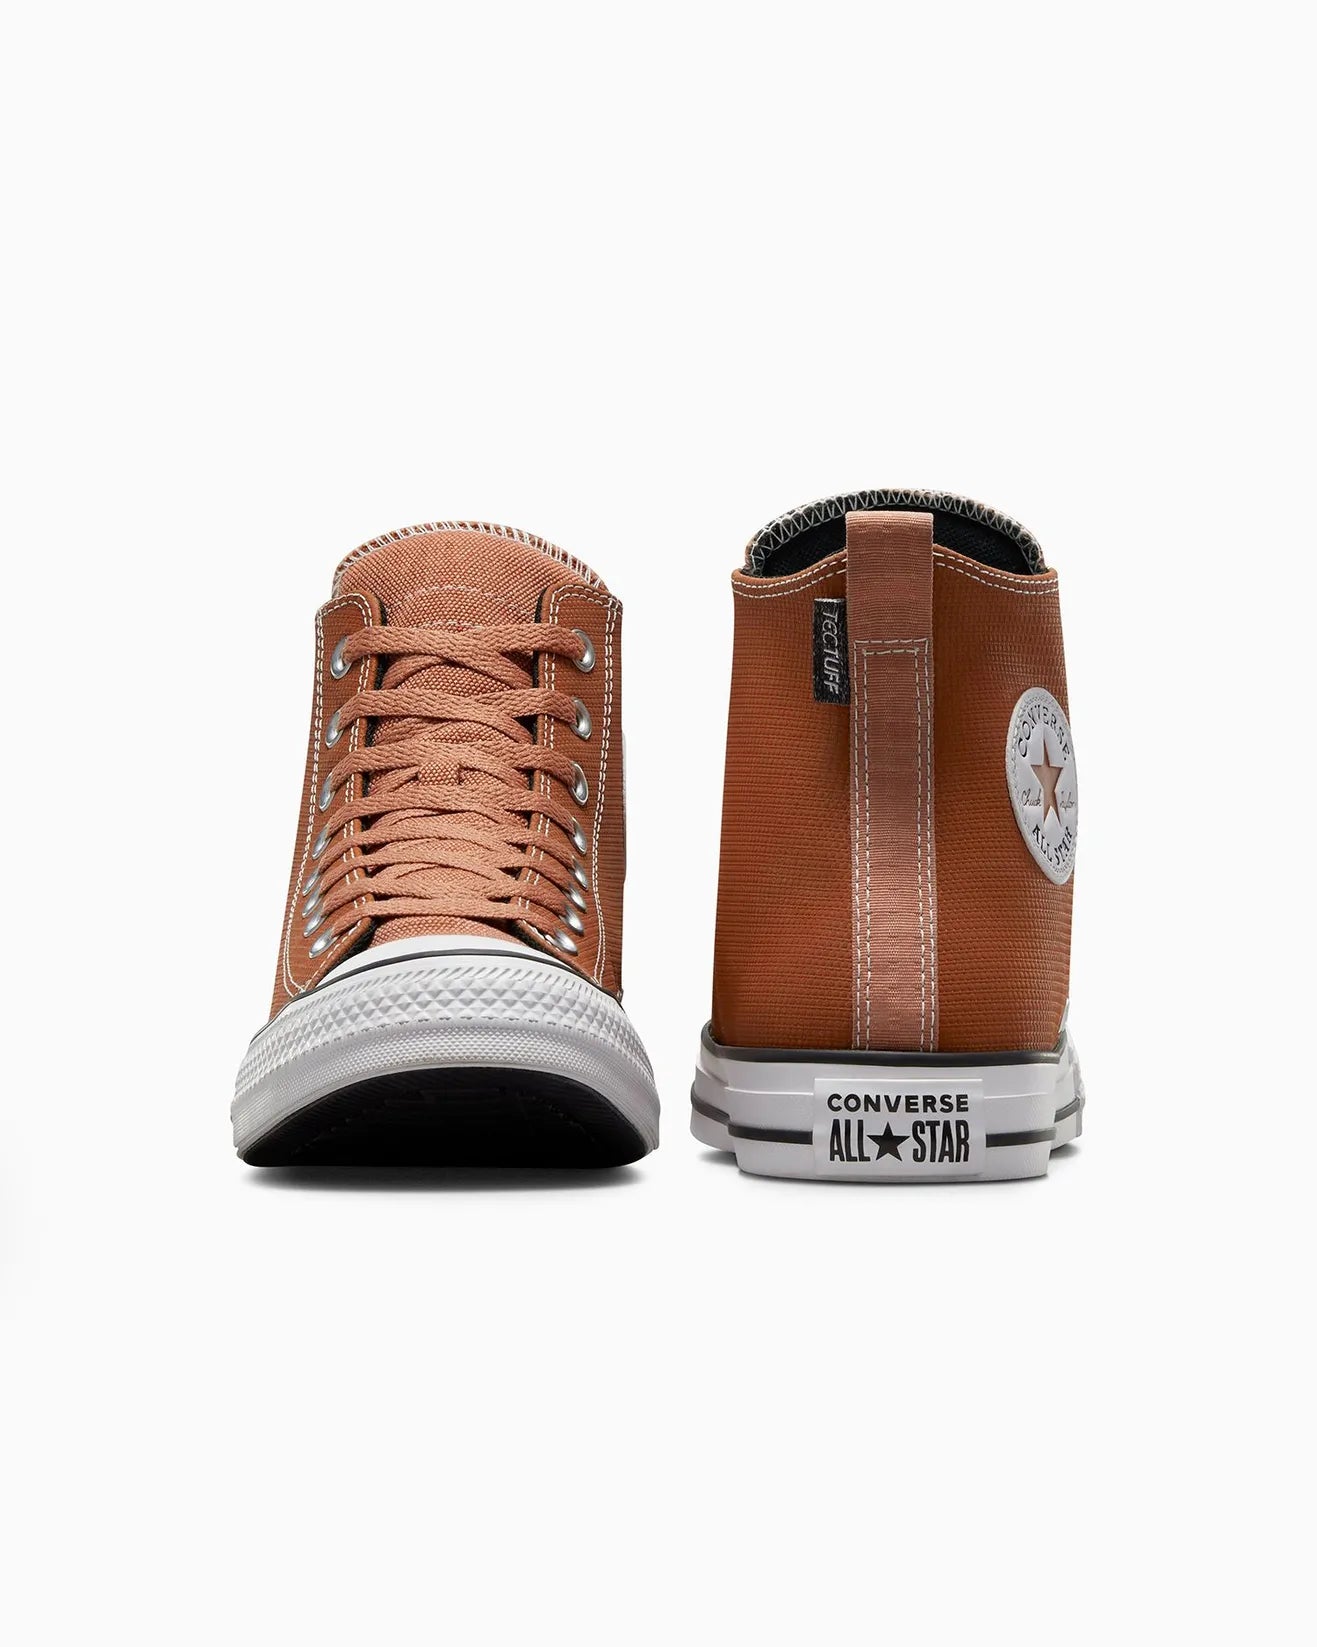 CONVERSE Chuck Taylor All Star Counter Climate Hi Shoe - Tawny Owl/Clay Pot/White